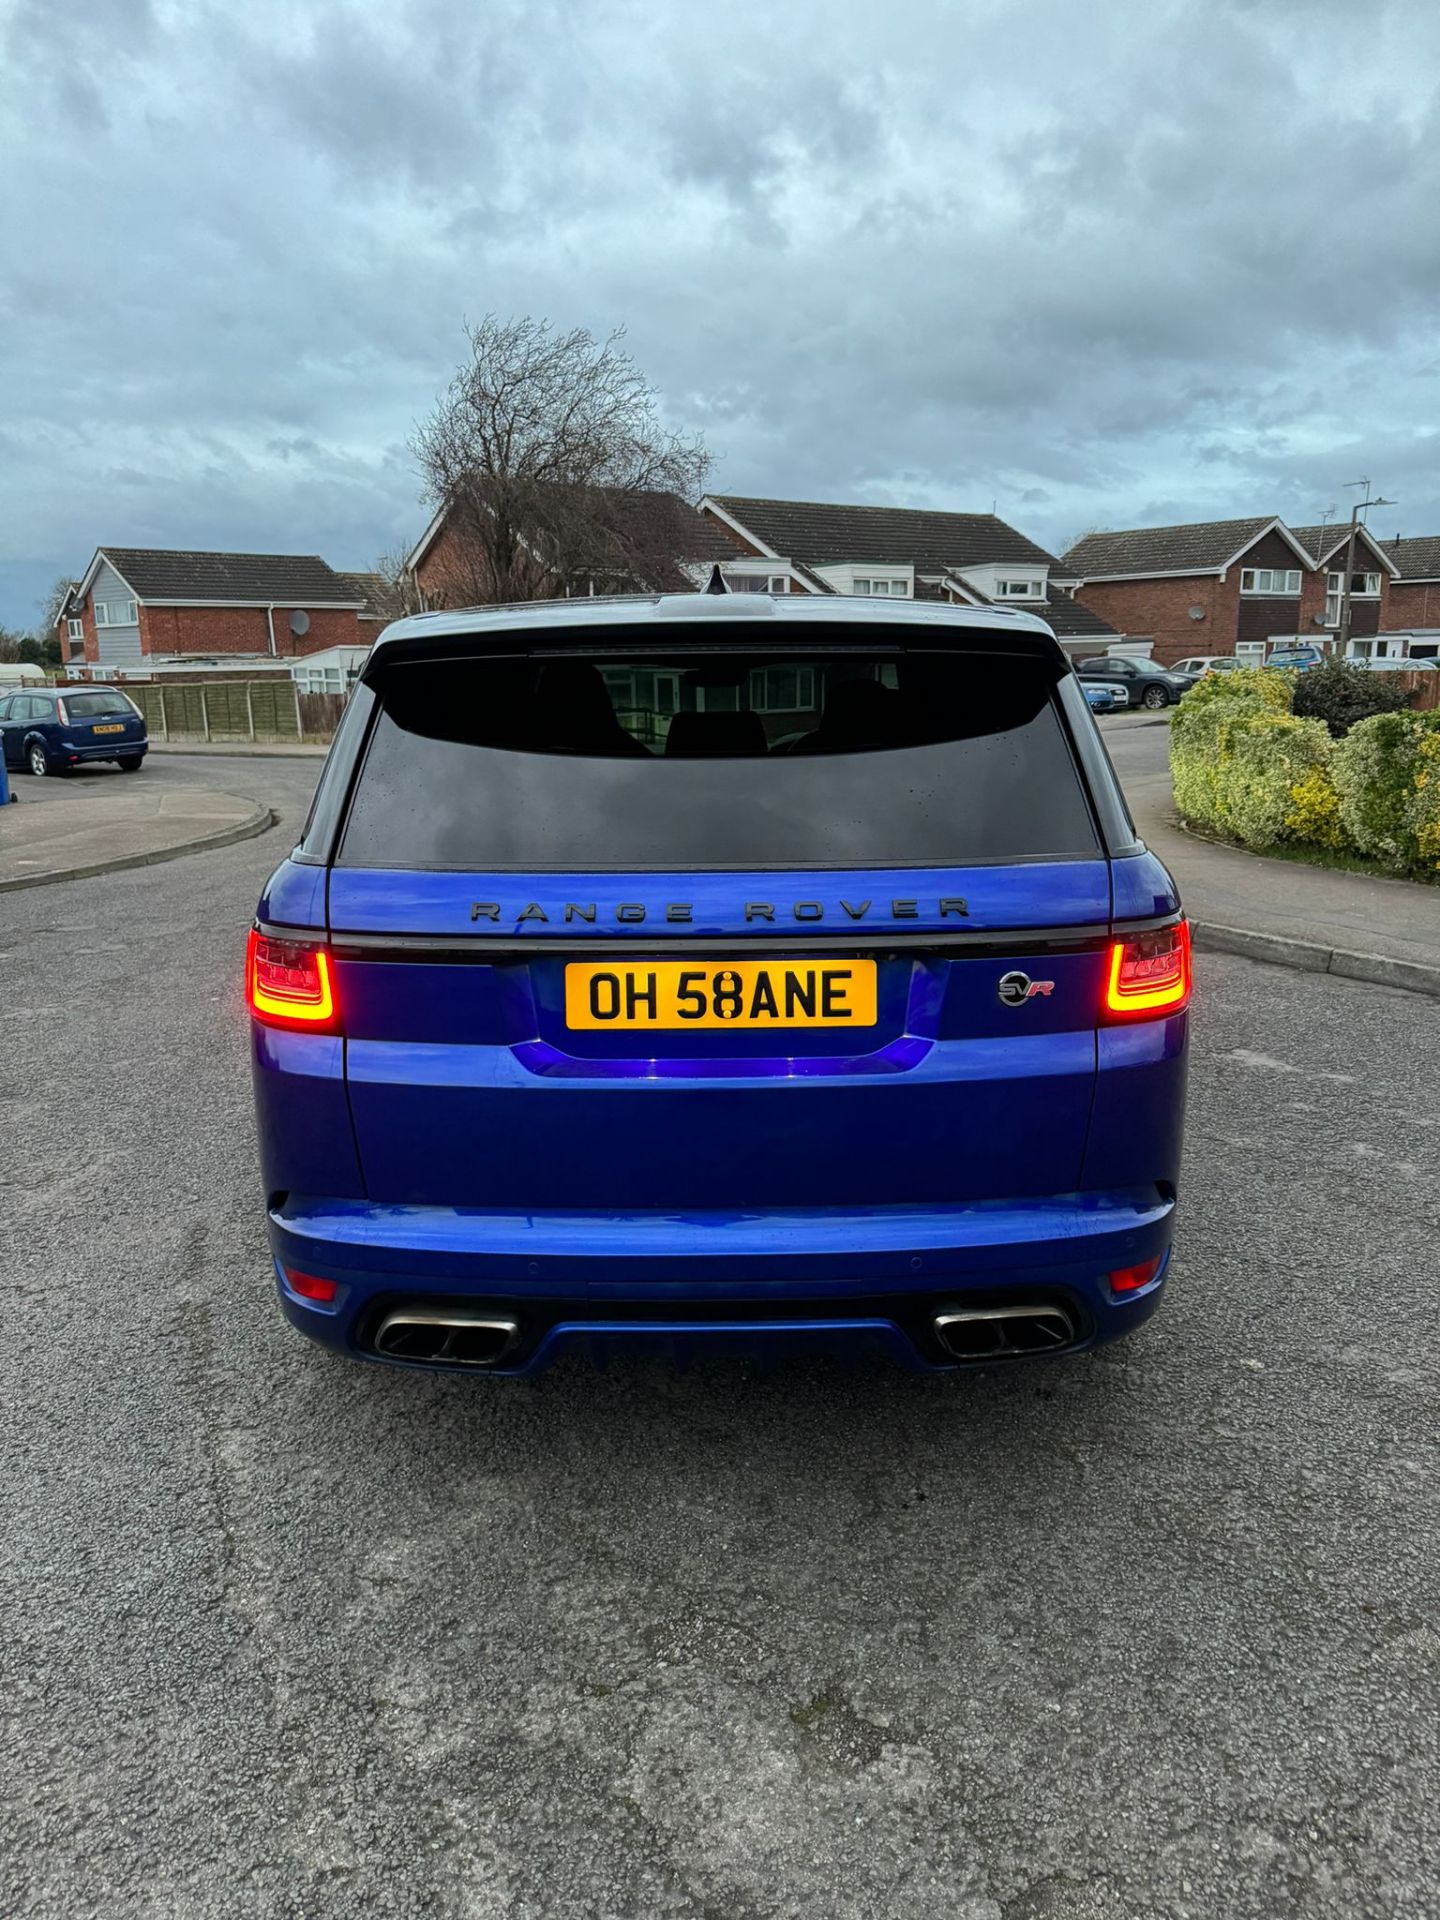 2018 18 RANGE ROVER SVR - 62K MILES WITH FULL LAND ROVER HISTORY - EXTREMELY CLEAN EXAMPLE. - Image 10 of 10